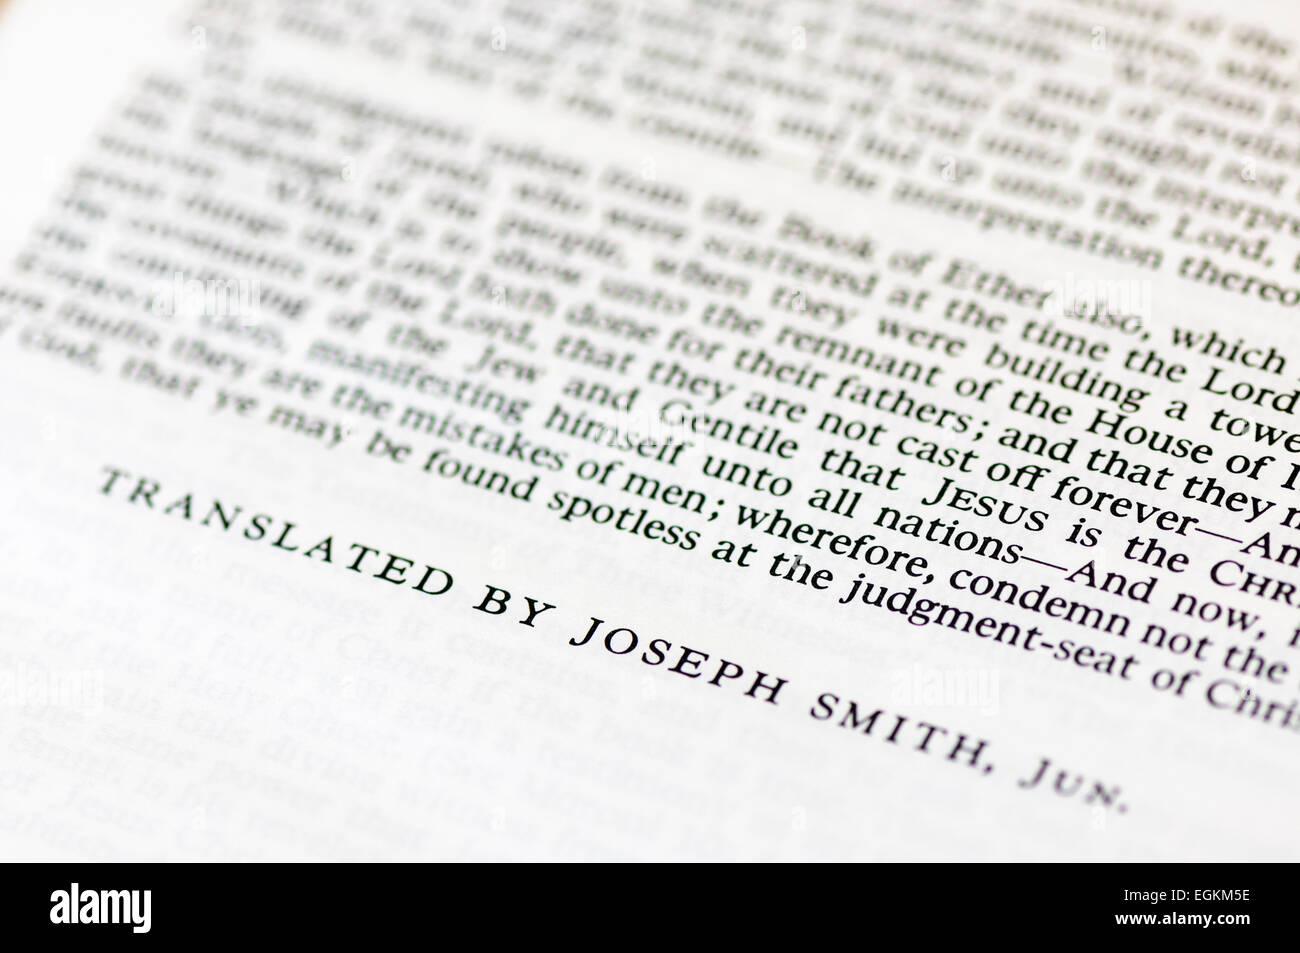 Introduction to the book of Mormon, translated by Joseph Smith. Stock Photo